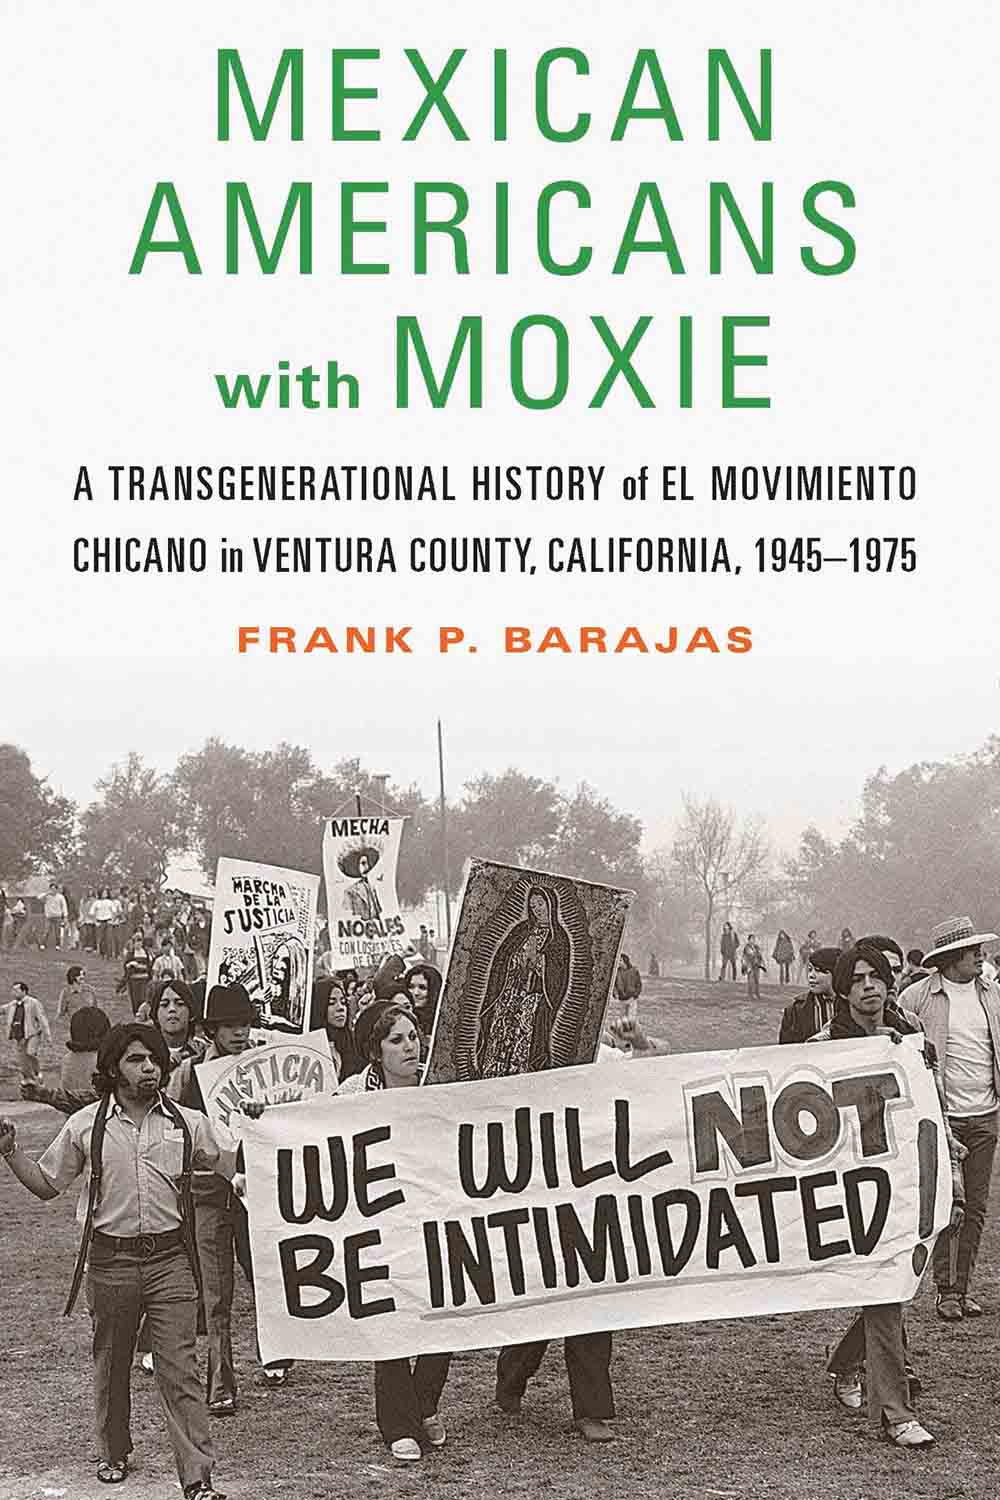 "Mexican Americans with Moxie"